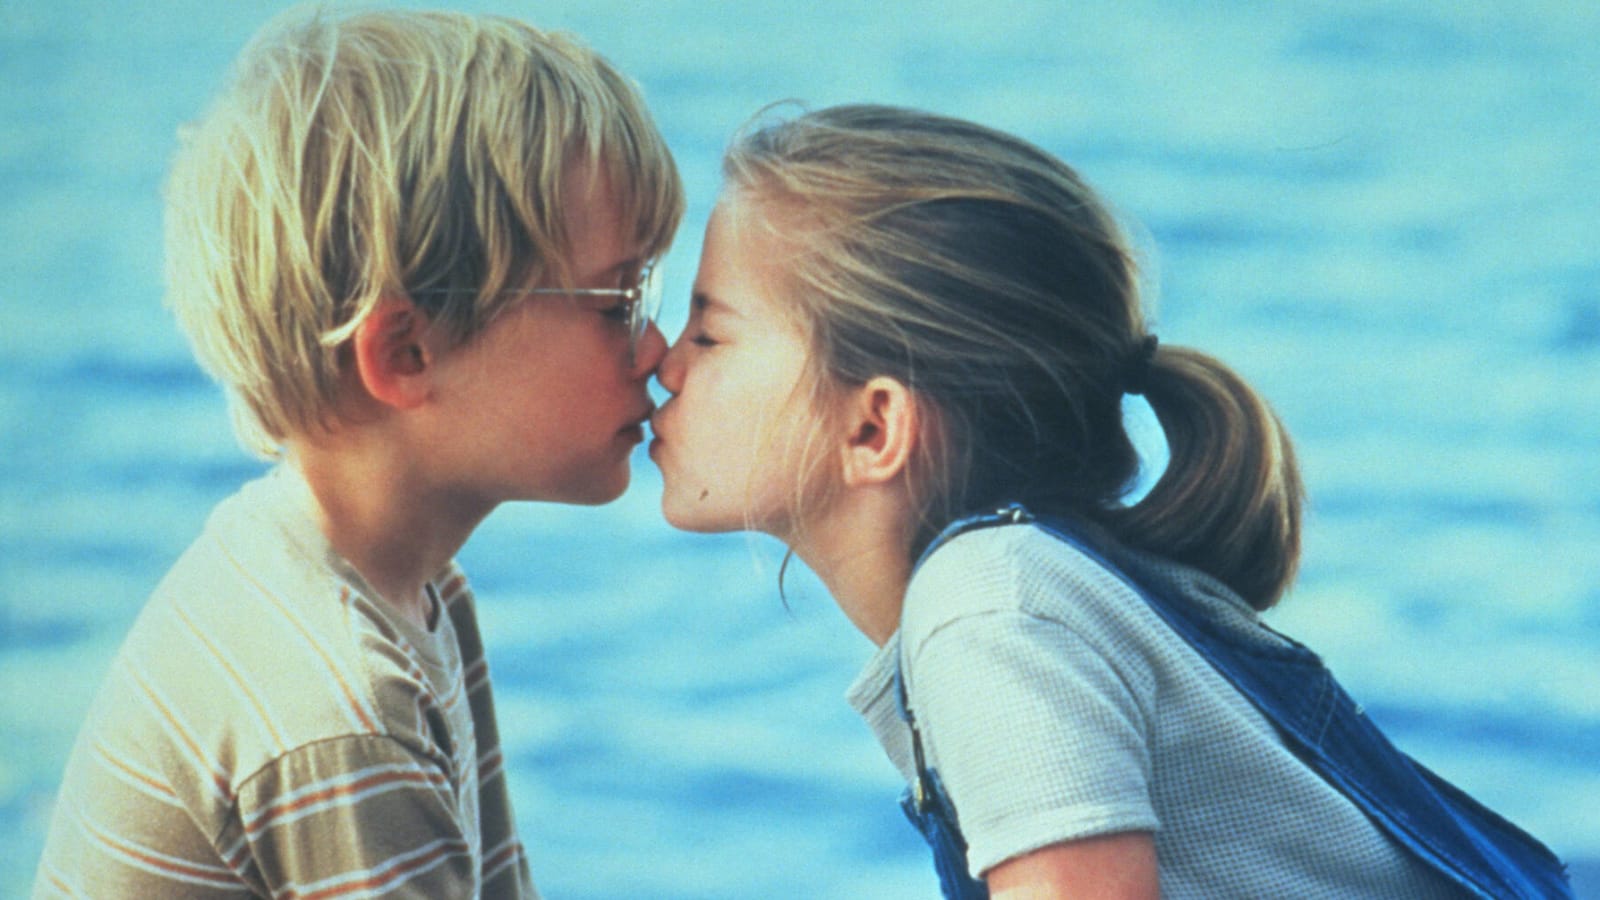 20 movies that are guaranteed to make you cry